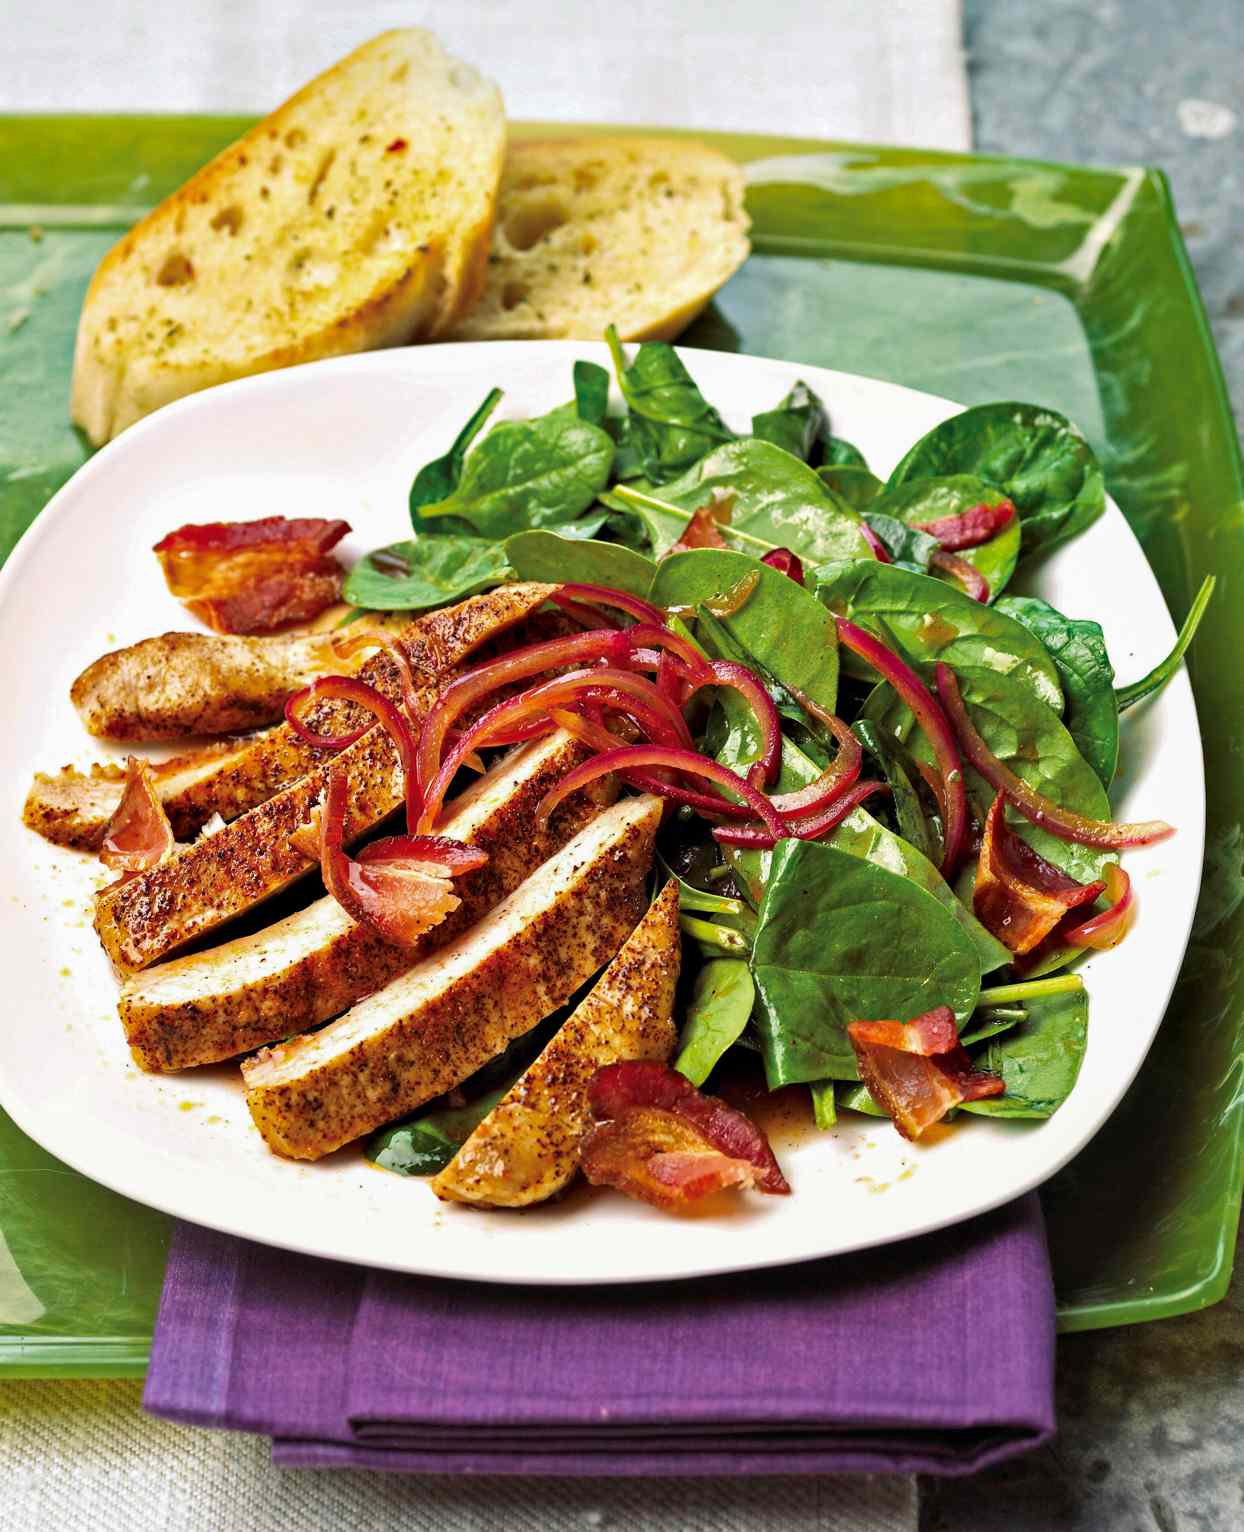 Spinach Salad with Ancho Chili Pepper Chops